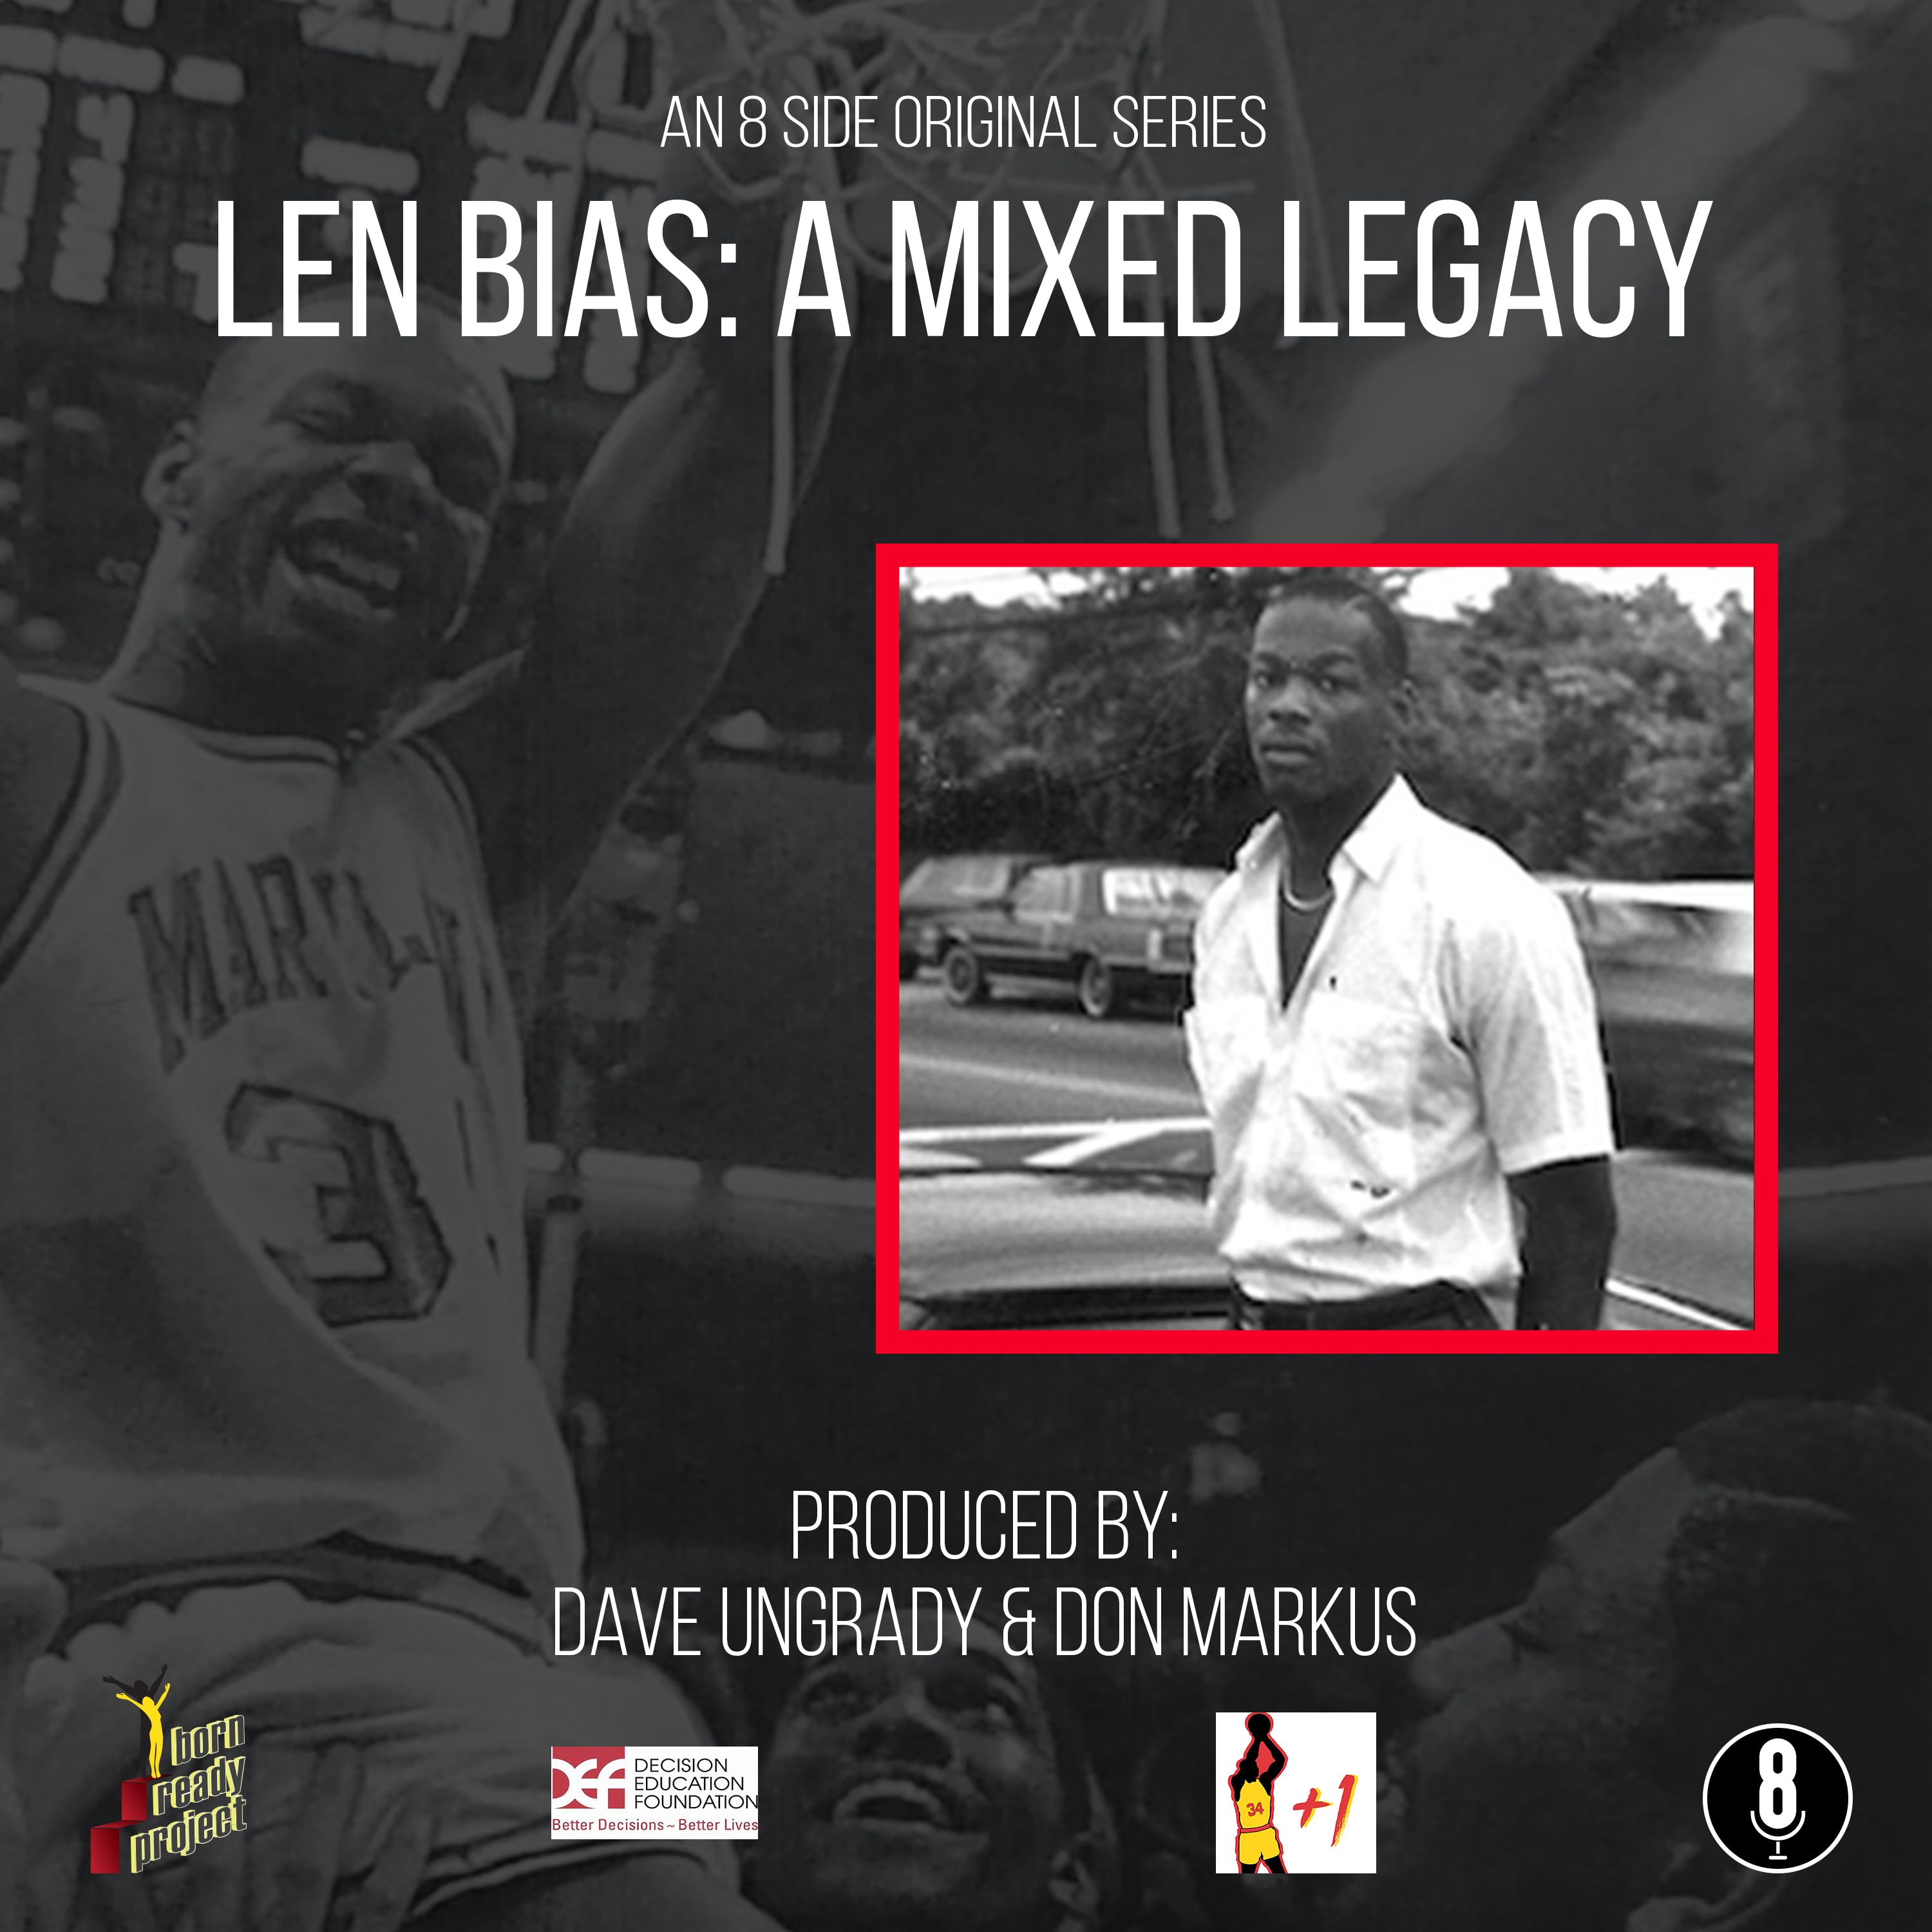 Ep 1 - Len Bias: A Mixed Legacy - The Introduction